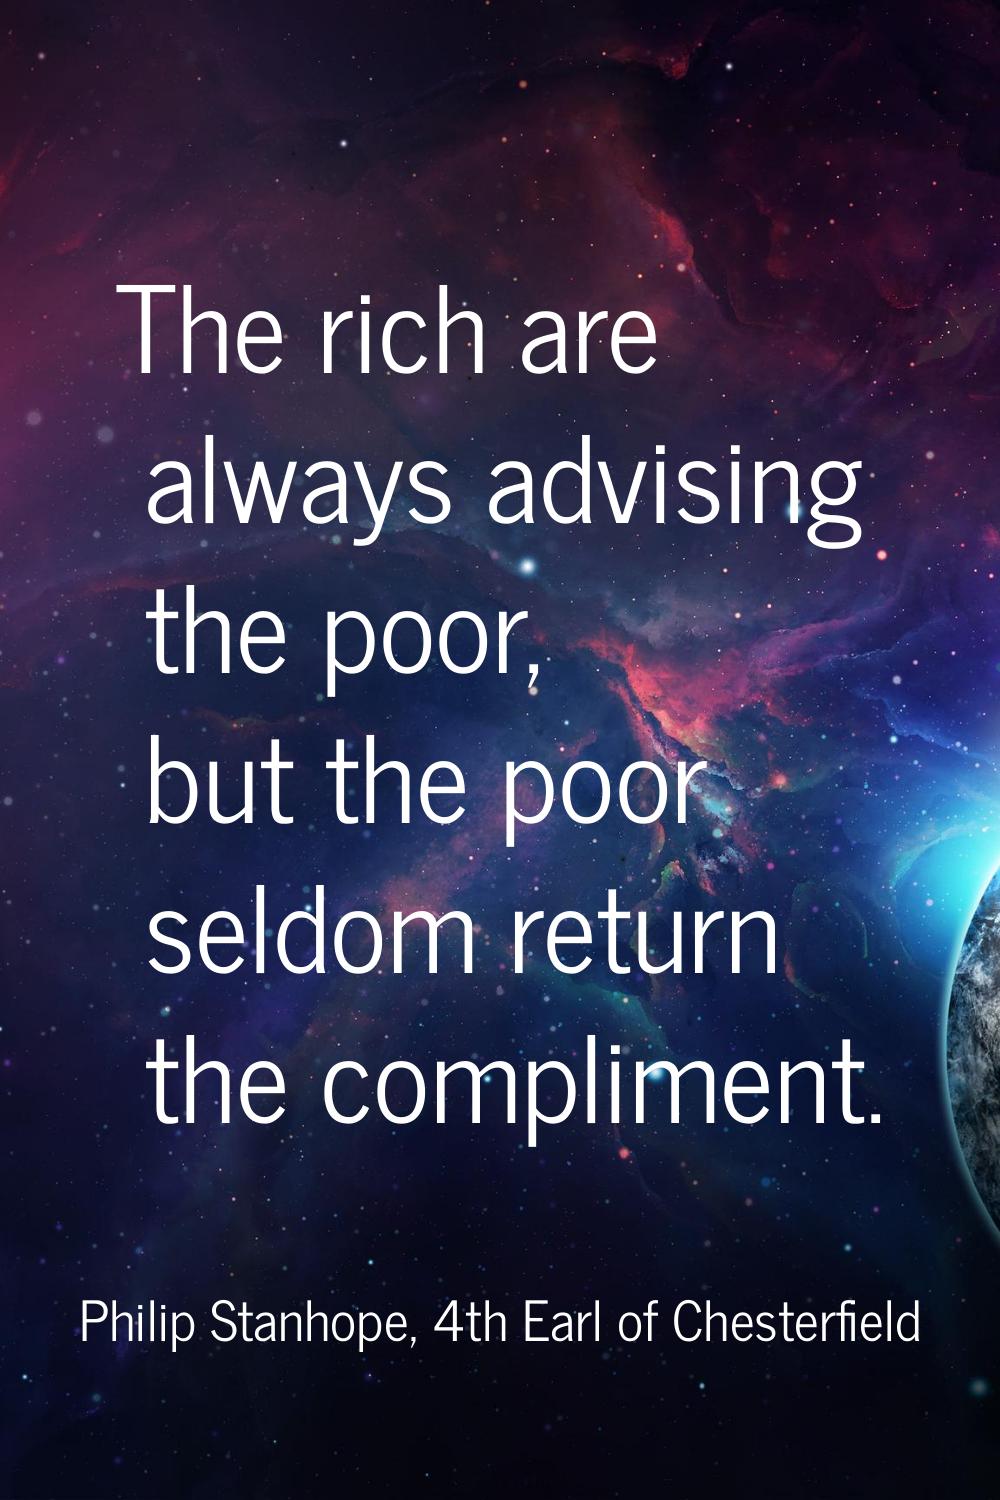 The rich are always advising the poor, but the poor seldom return the compliment.